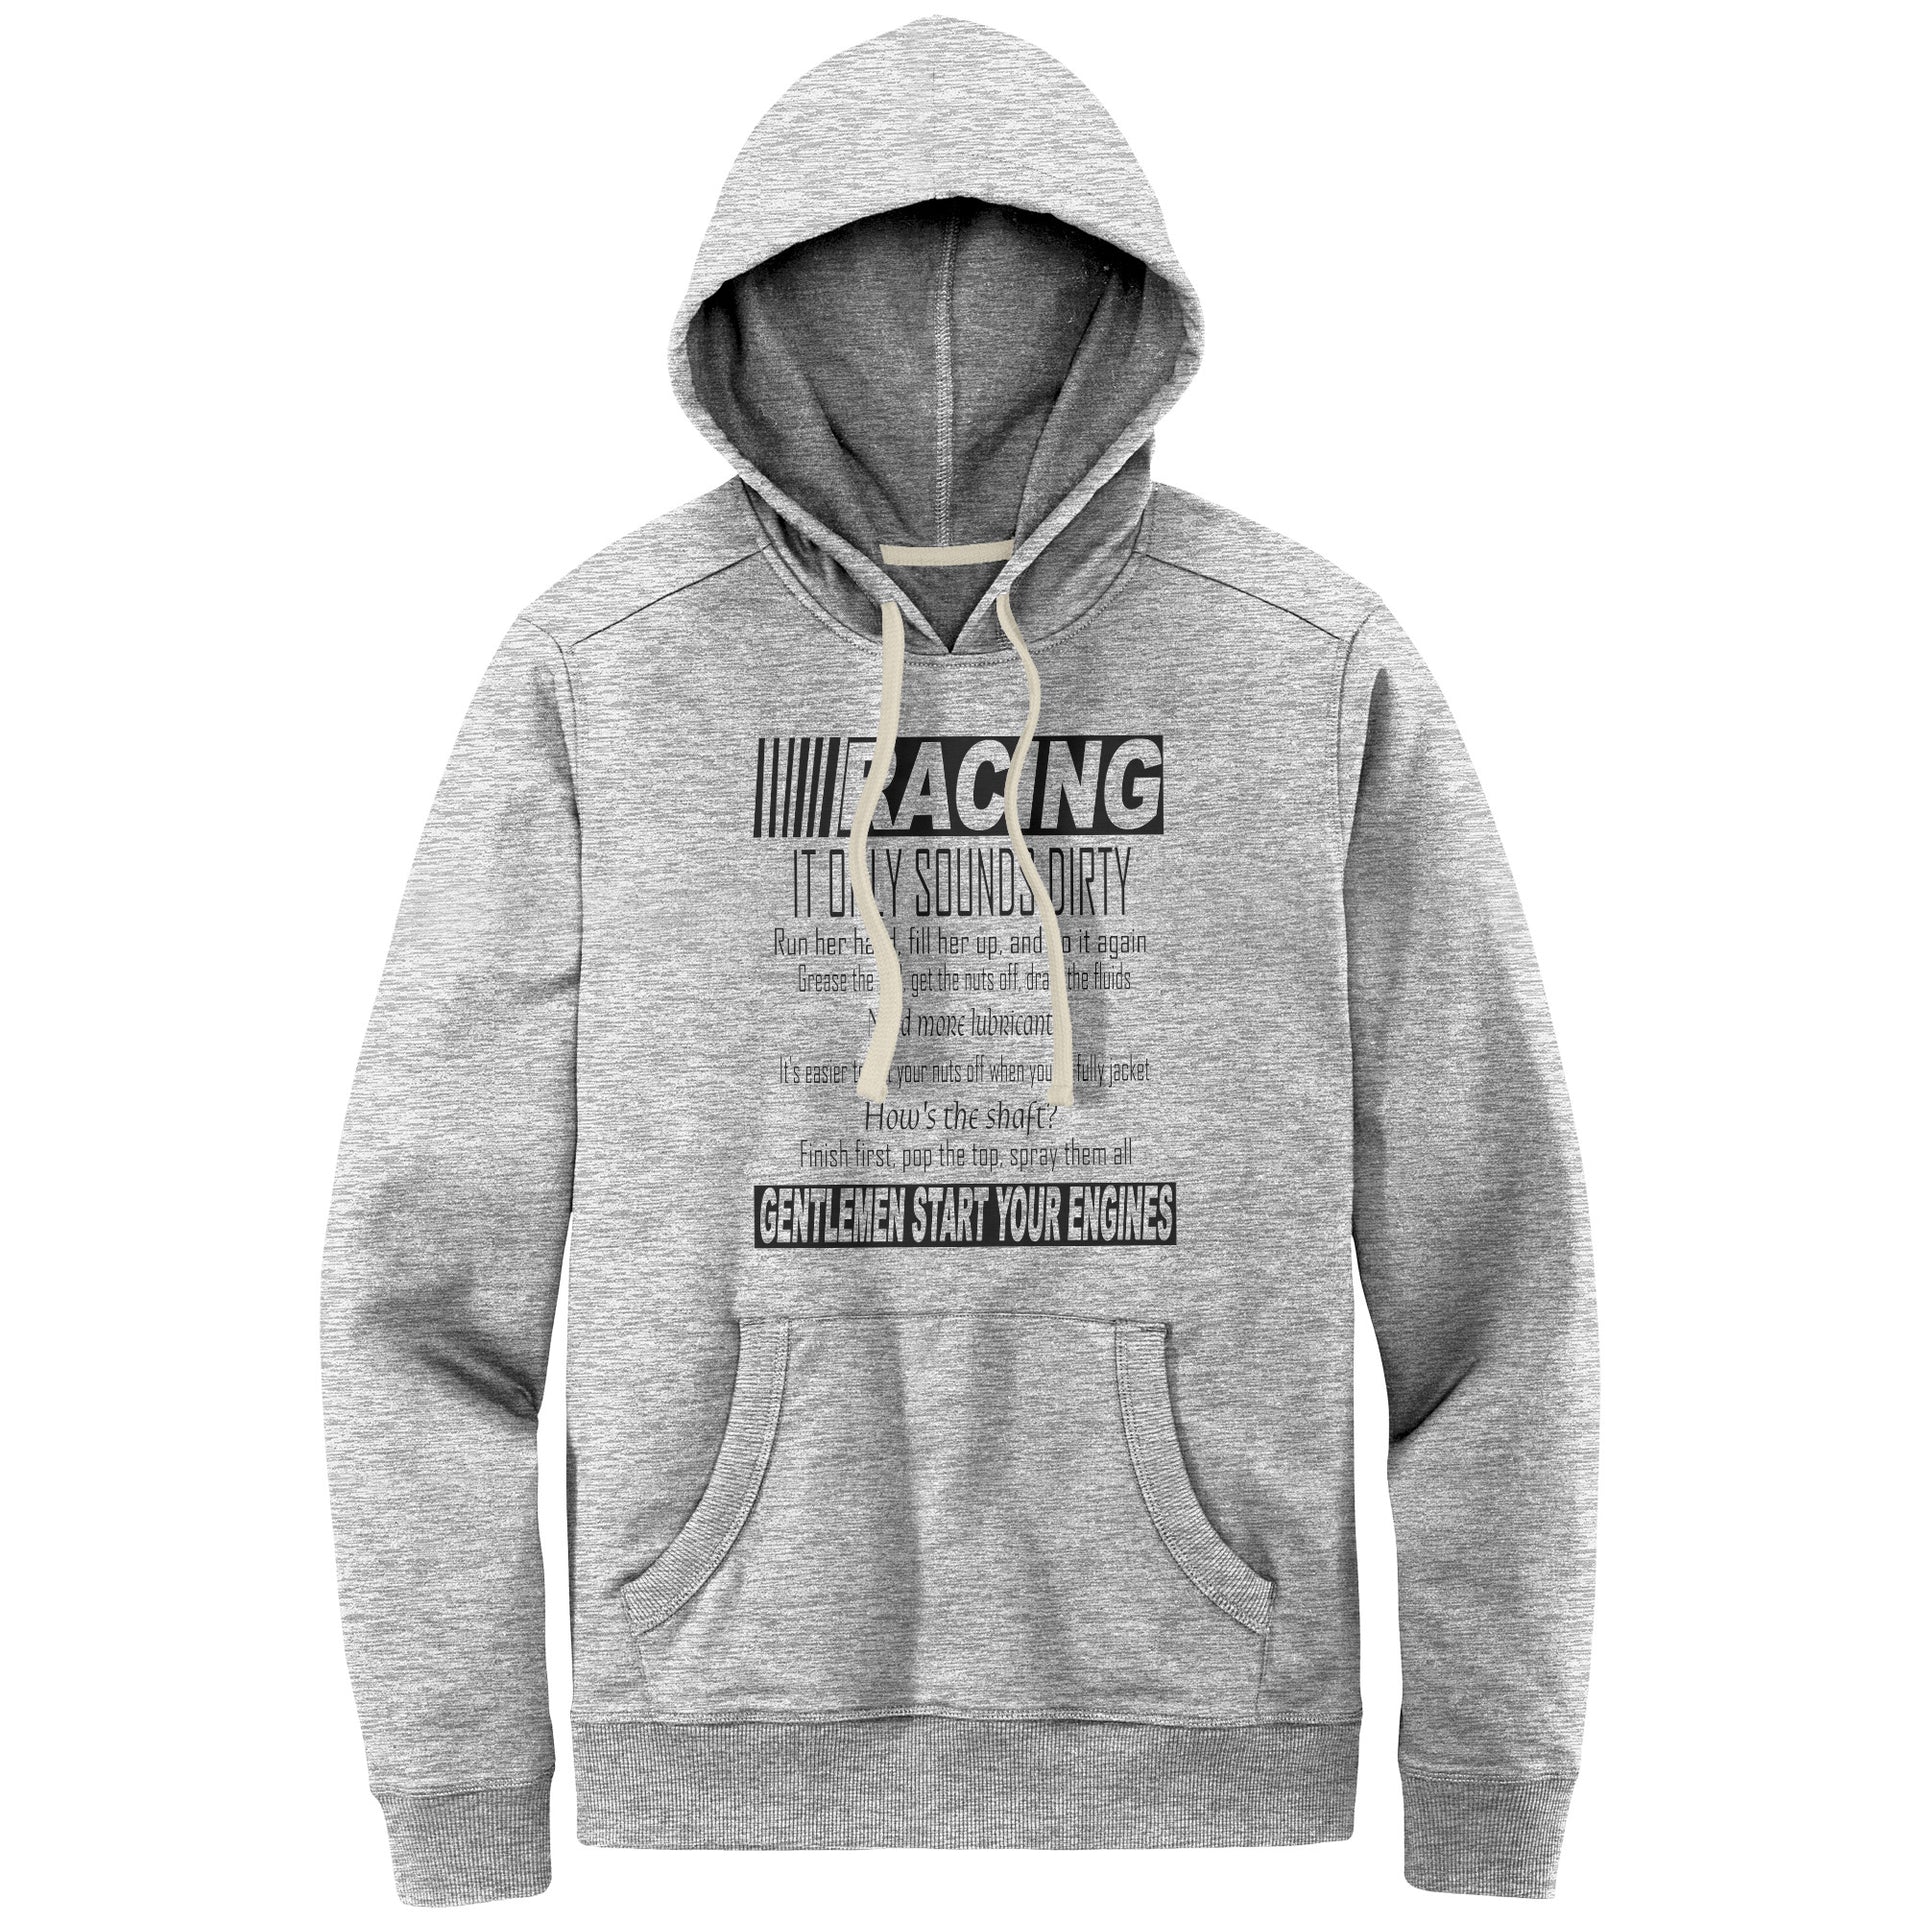 Racing It only sounds dirty hoodie